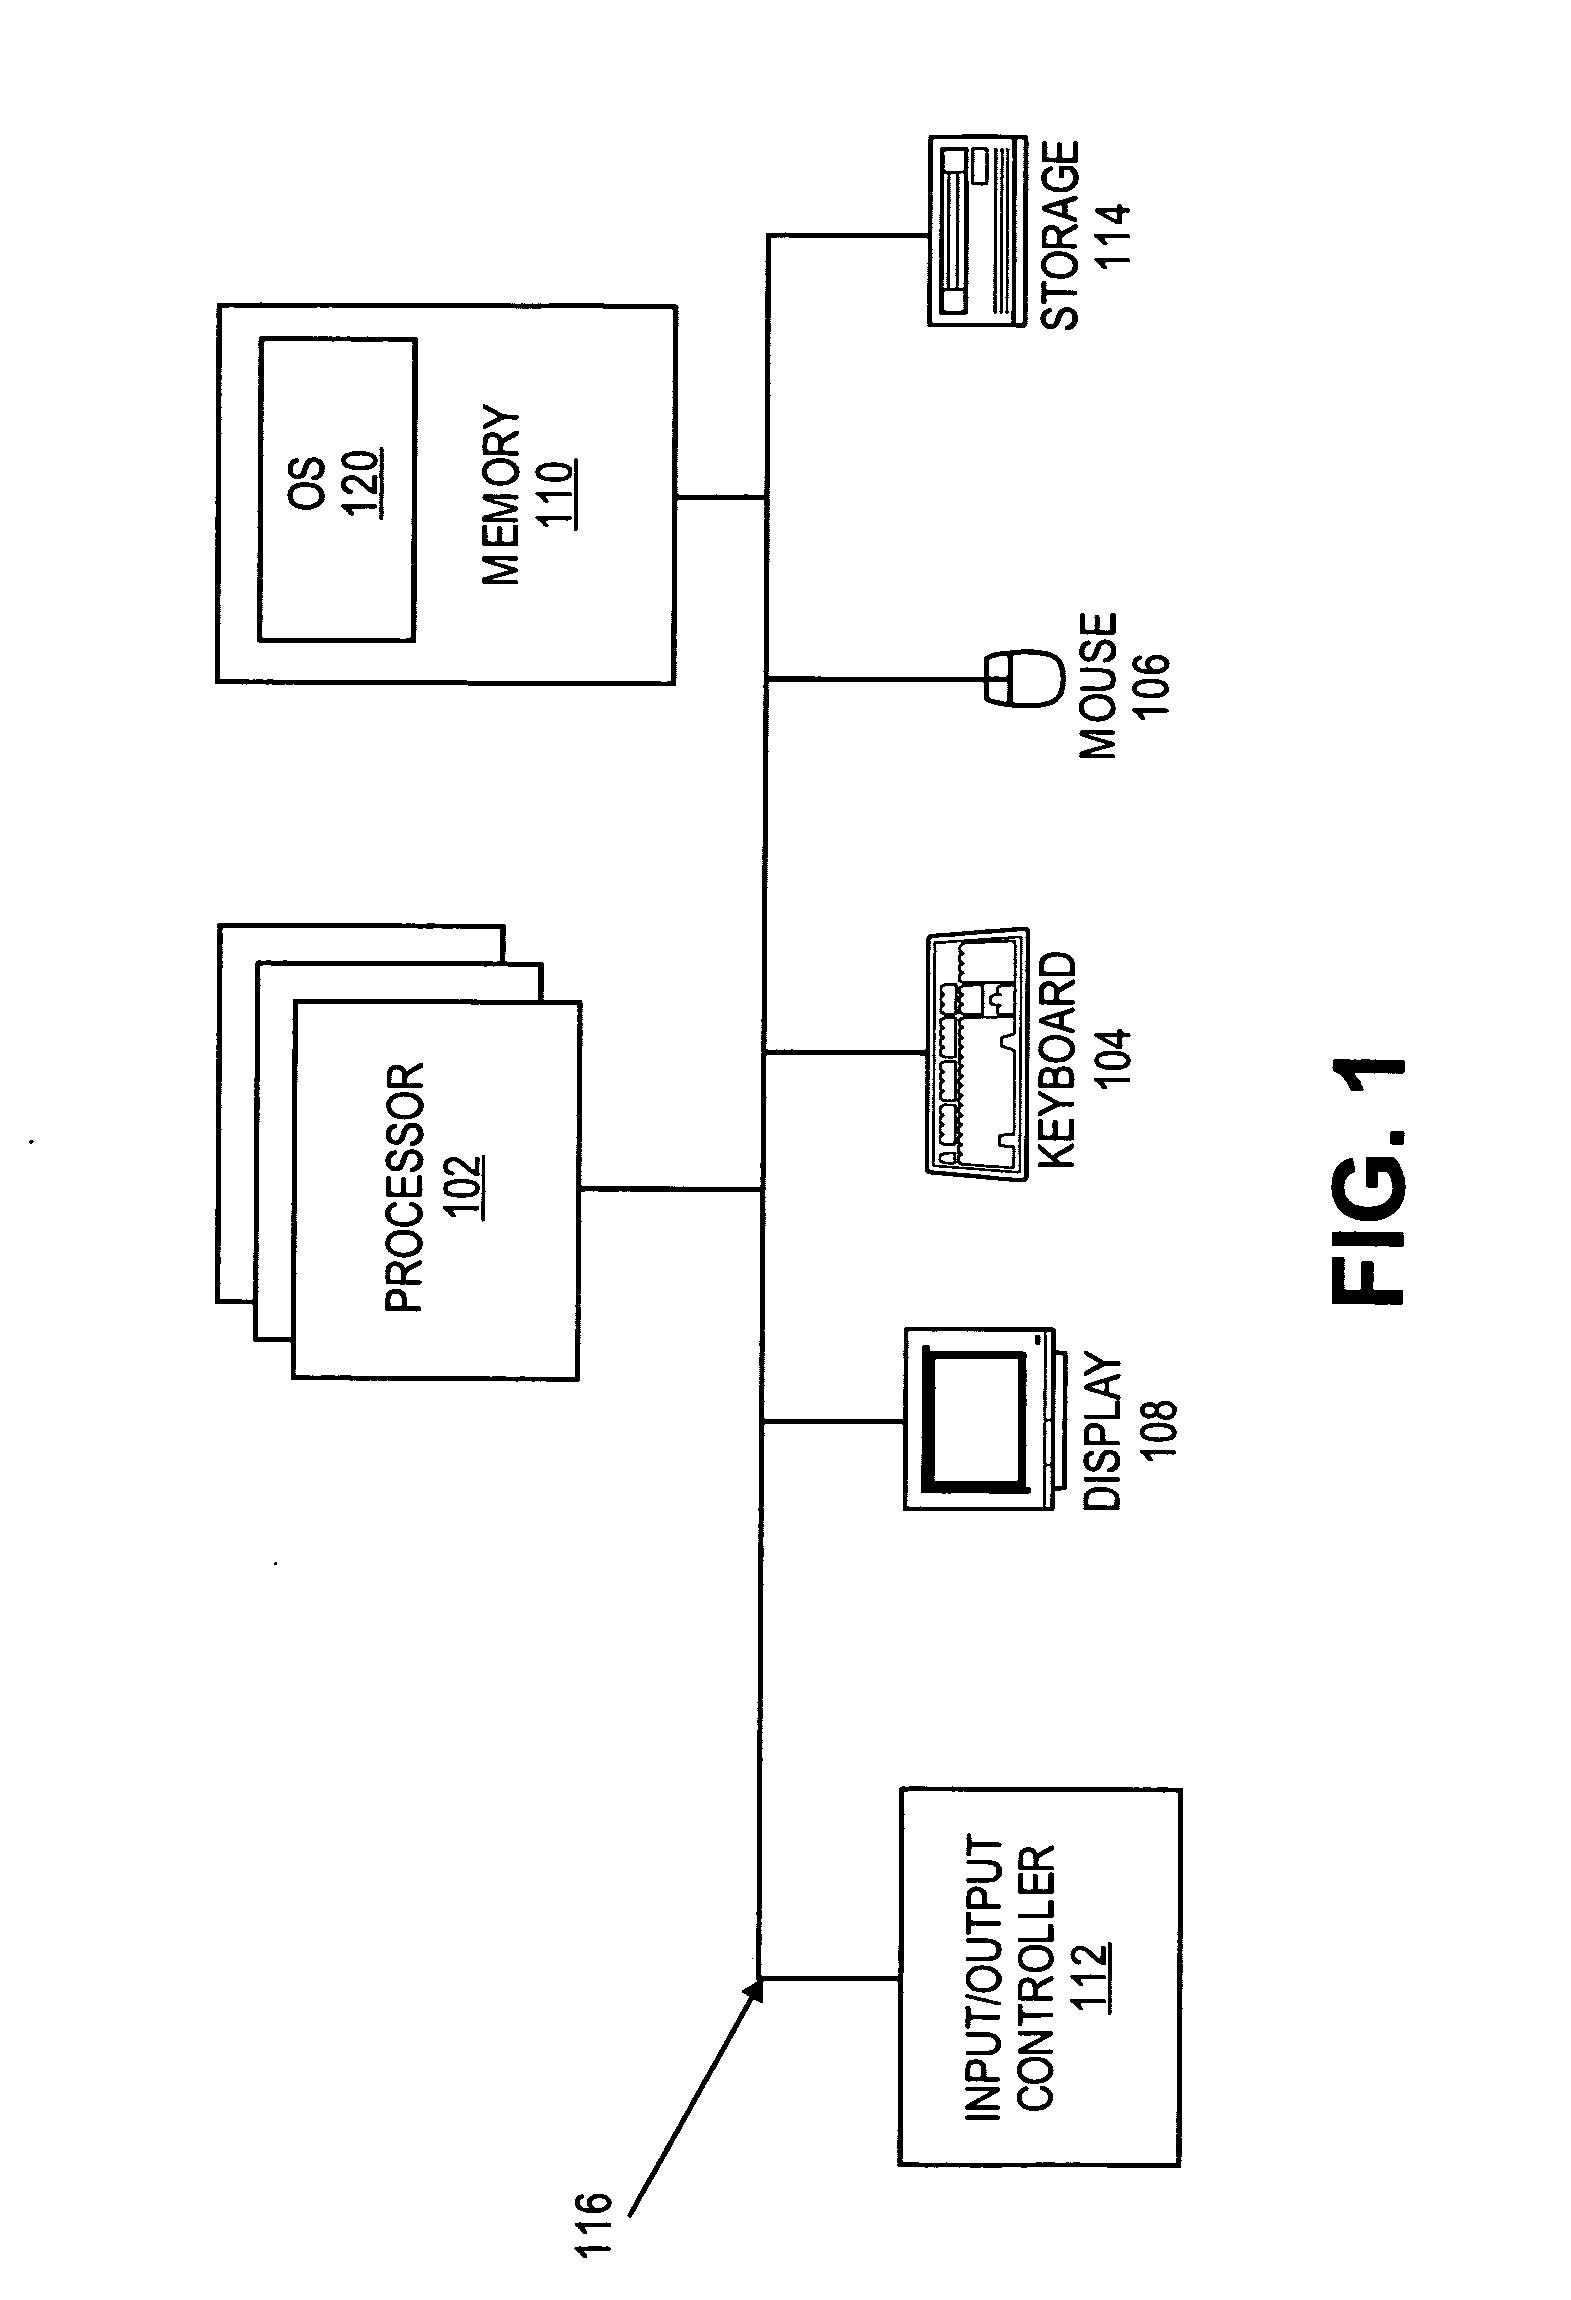 Methods and systems for scheduling processes in a multi-core processor environment